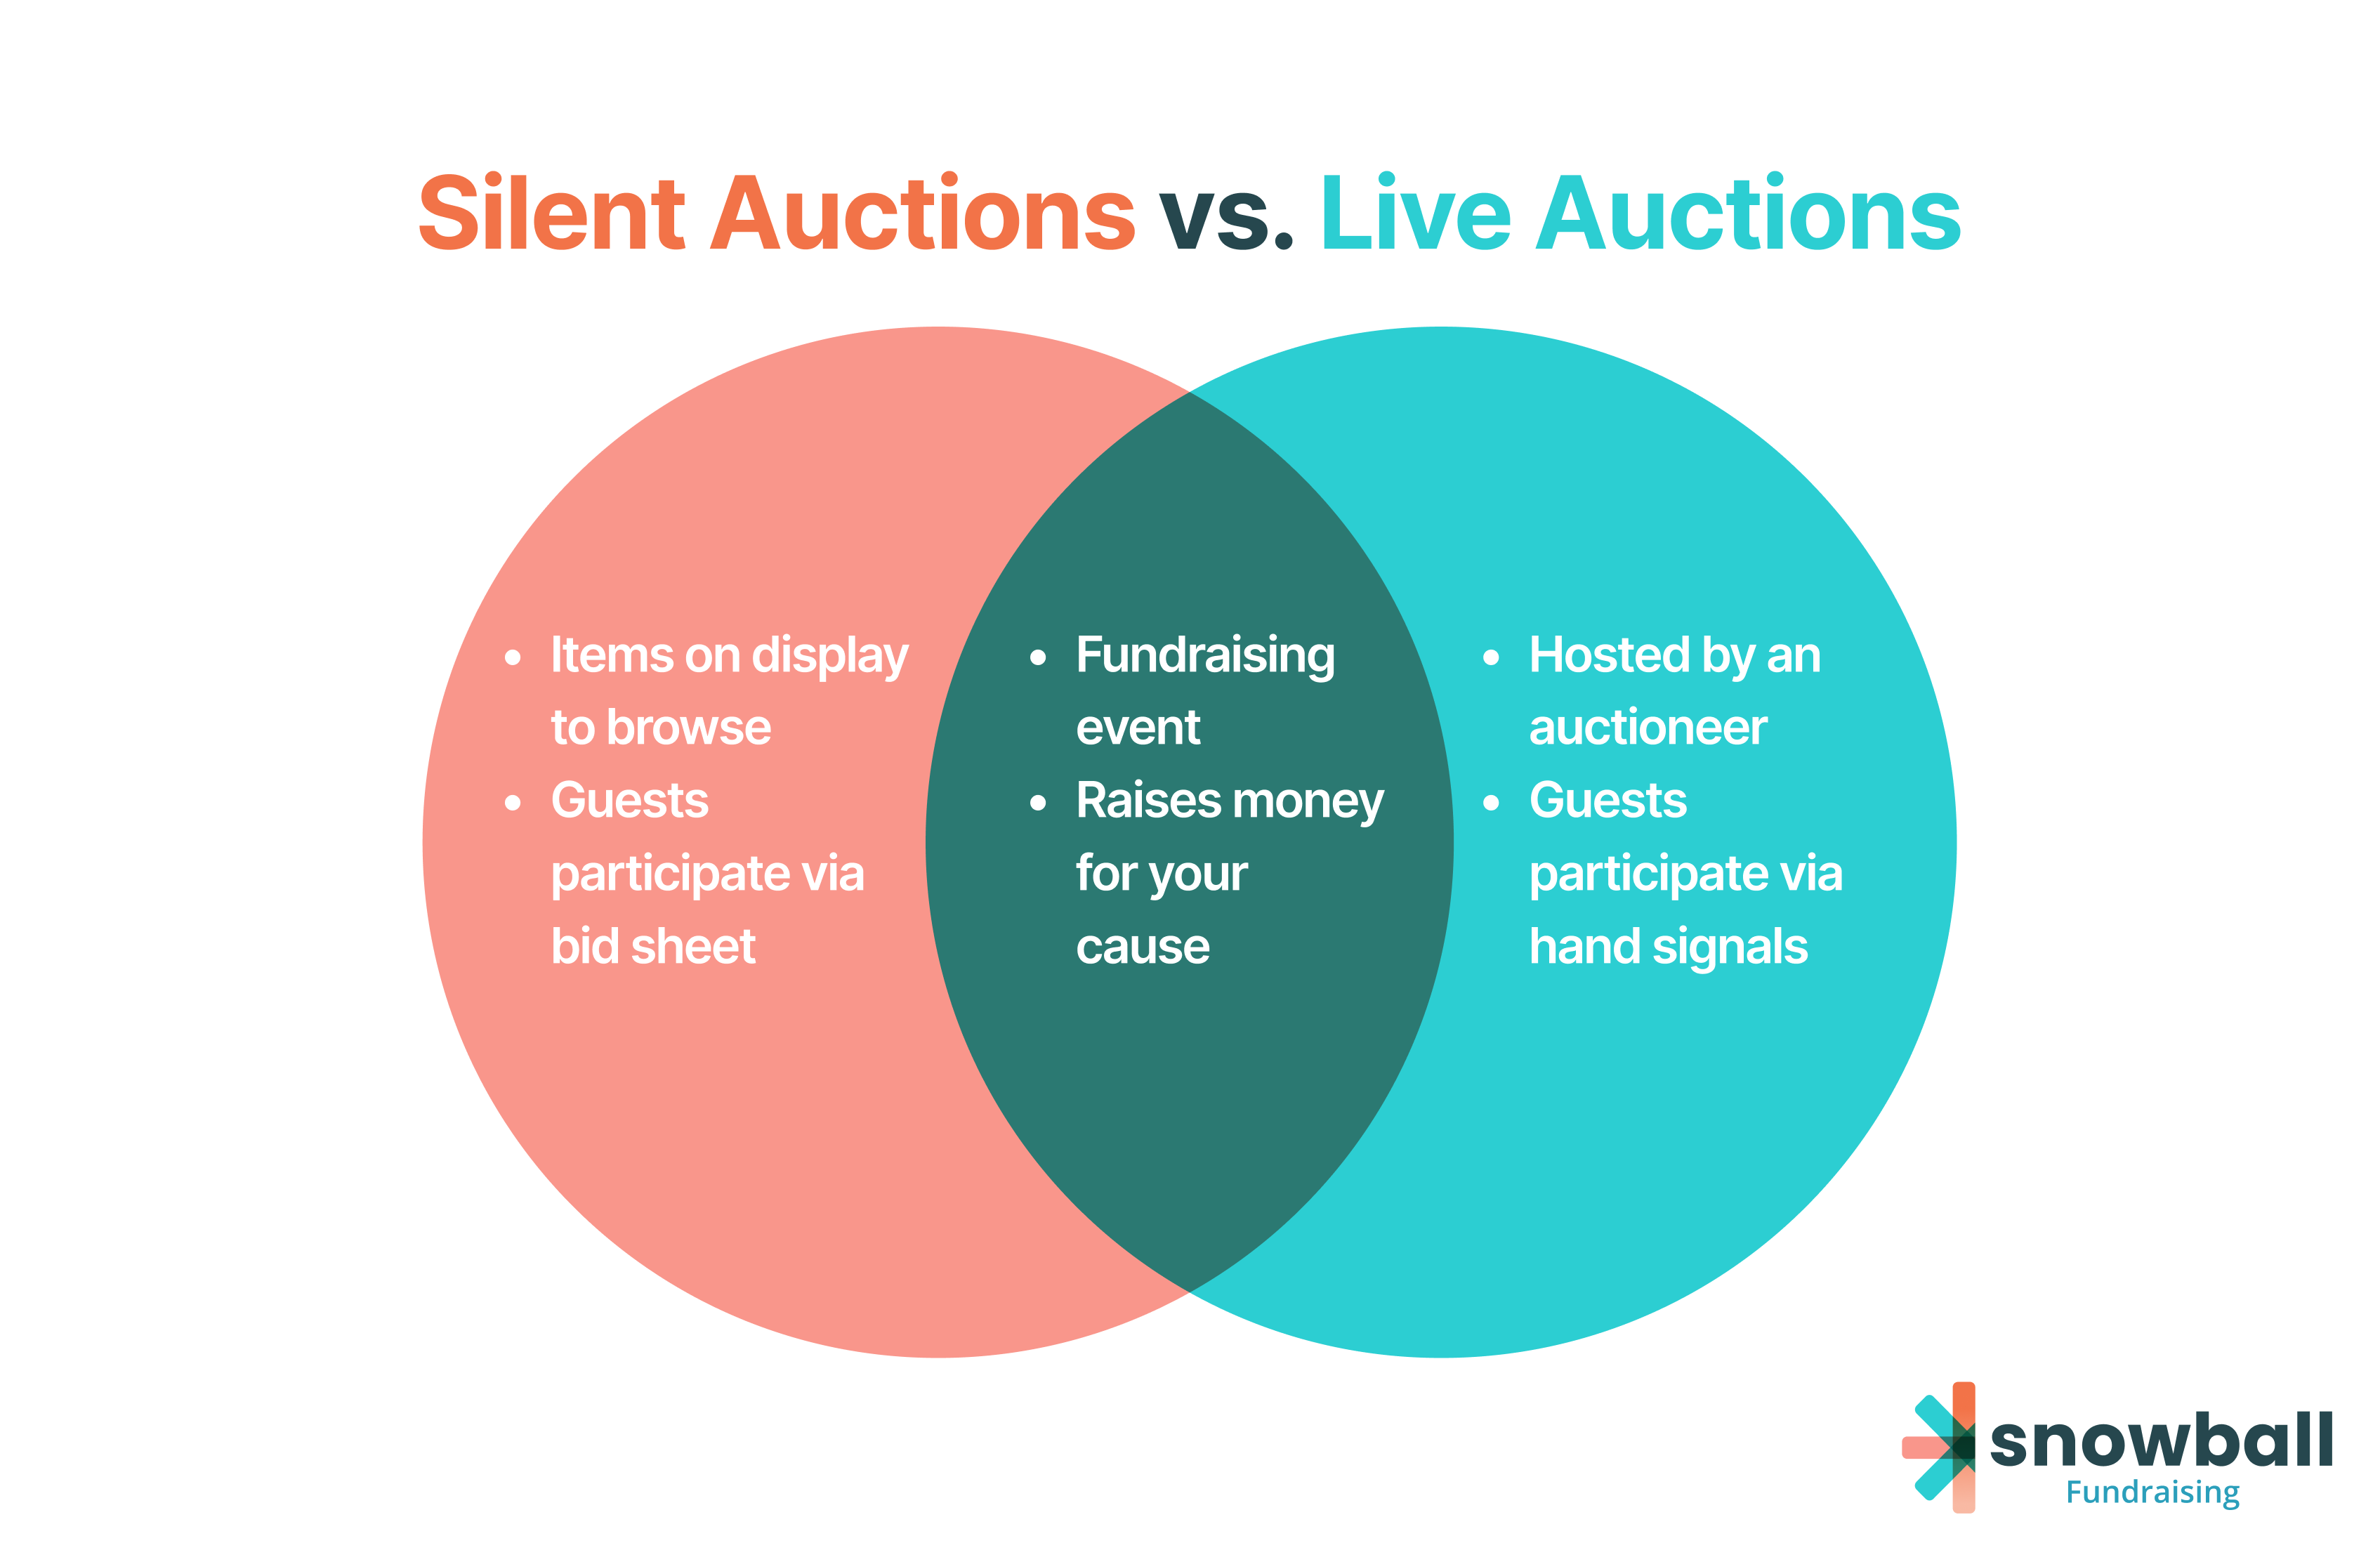 Silent auctions: During this event, items are displayed (either physically or in a catalog online). Guests are encouraged to browse and place bids anonymously via a bid sheet or mobile bidding software. Items are typically up for bid for hours or days at a time.